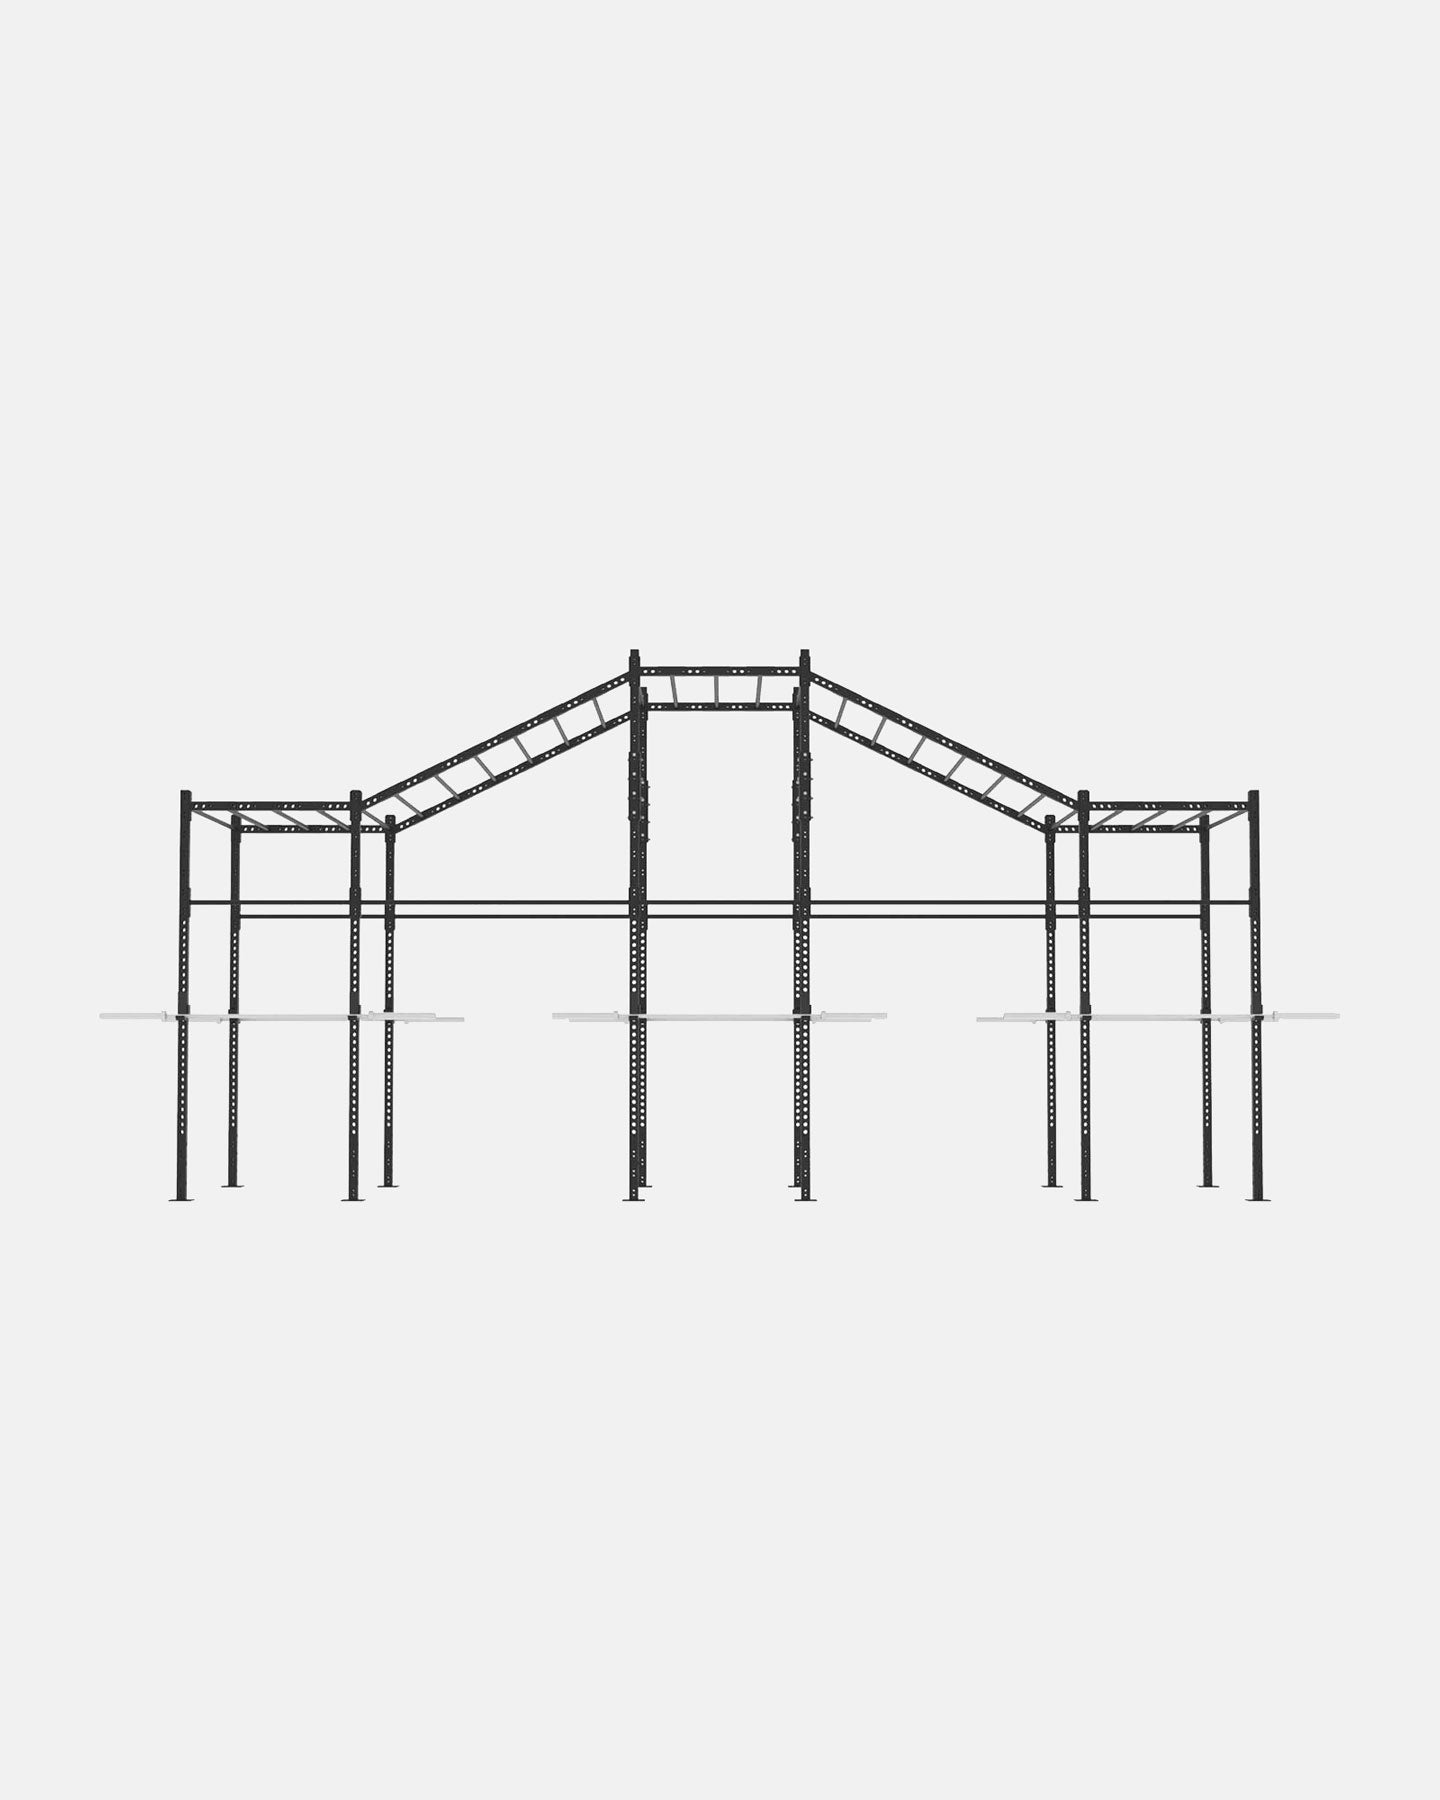 pull-up monkey bar pullup rig for crossfit gym freestanding